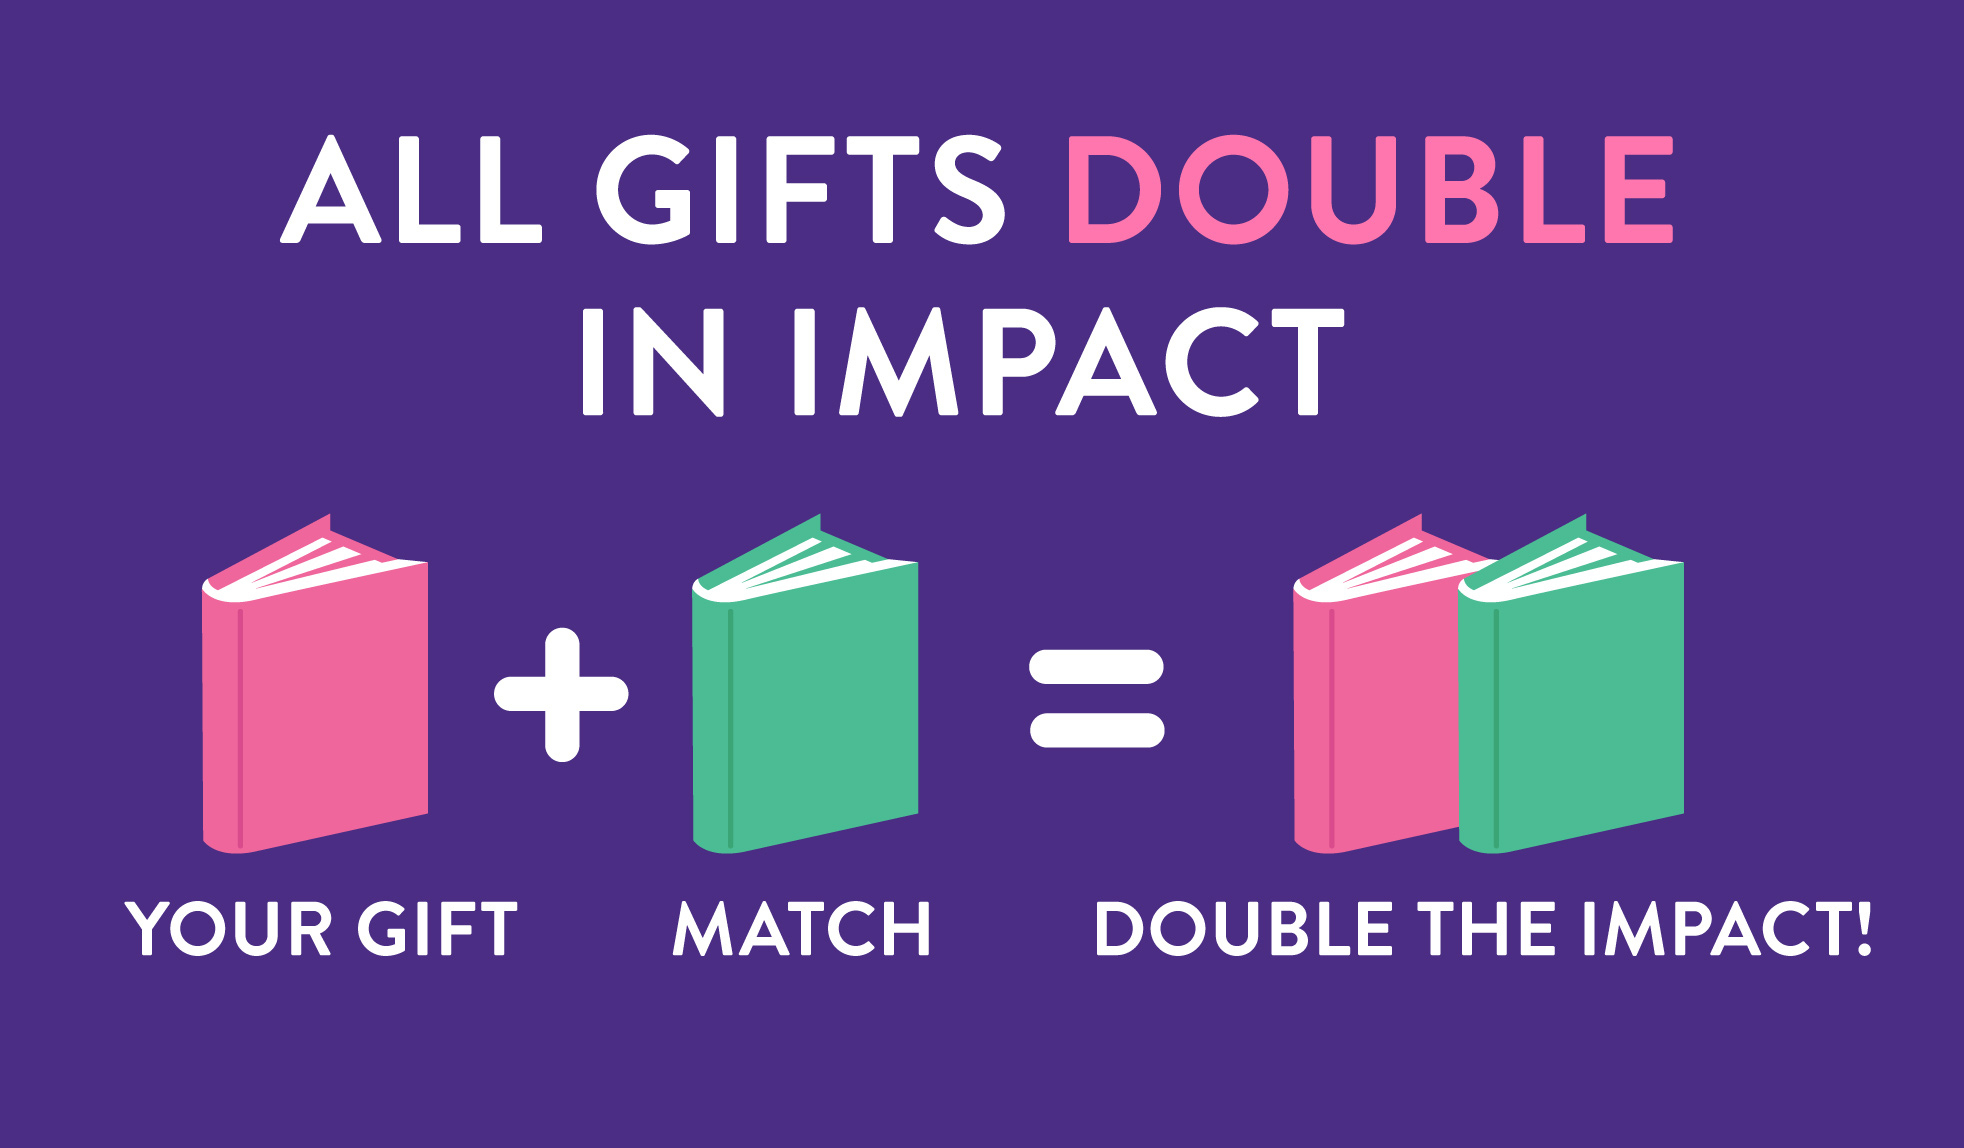 Your donation to the Library will be matched through July 31st!